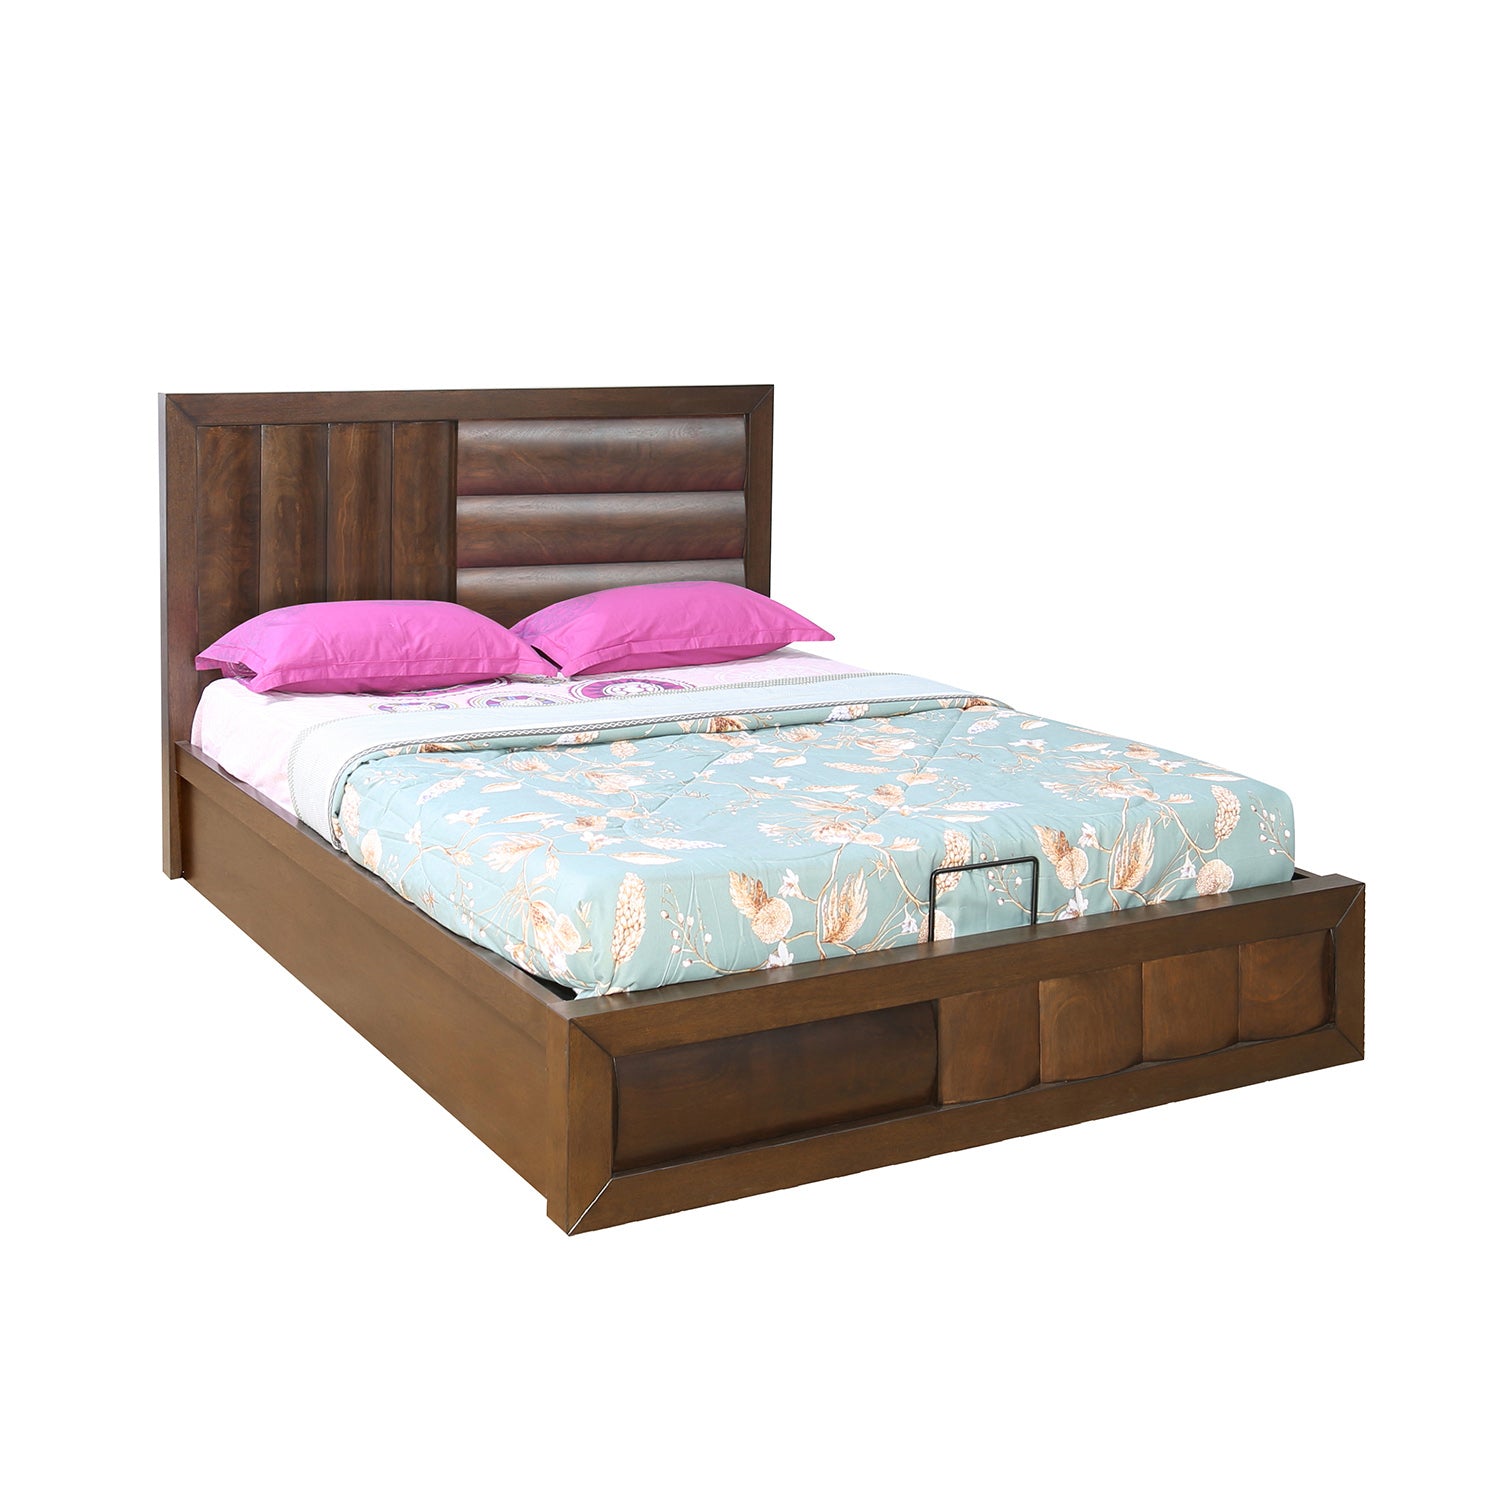 Gladiator King Bed With Hydraulic Storage (Brown)